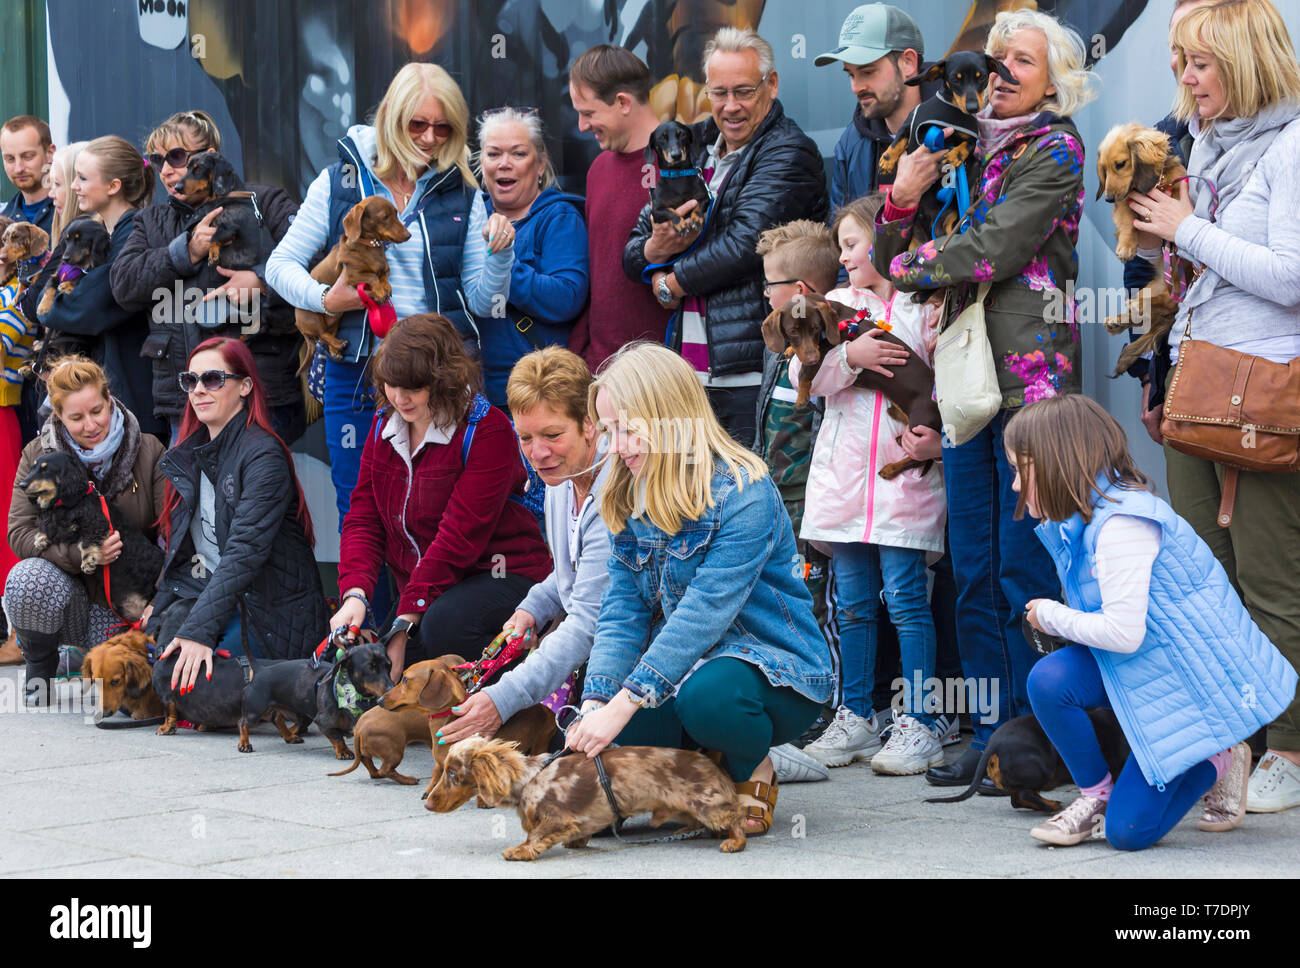 Boscombe, Bournemouth, Dorset, UK. 6th May 2019. Dachshund Dash, part of Bournemouth Emerging Arts Fringe (BEAF) Festival invites dachshunds and their owners to gather under the Daschund artwork to see how many they can gather in one place. Credit: Carolyn Jenkins/Alamy Live News Stock Photo